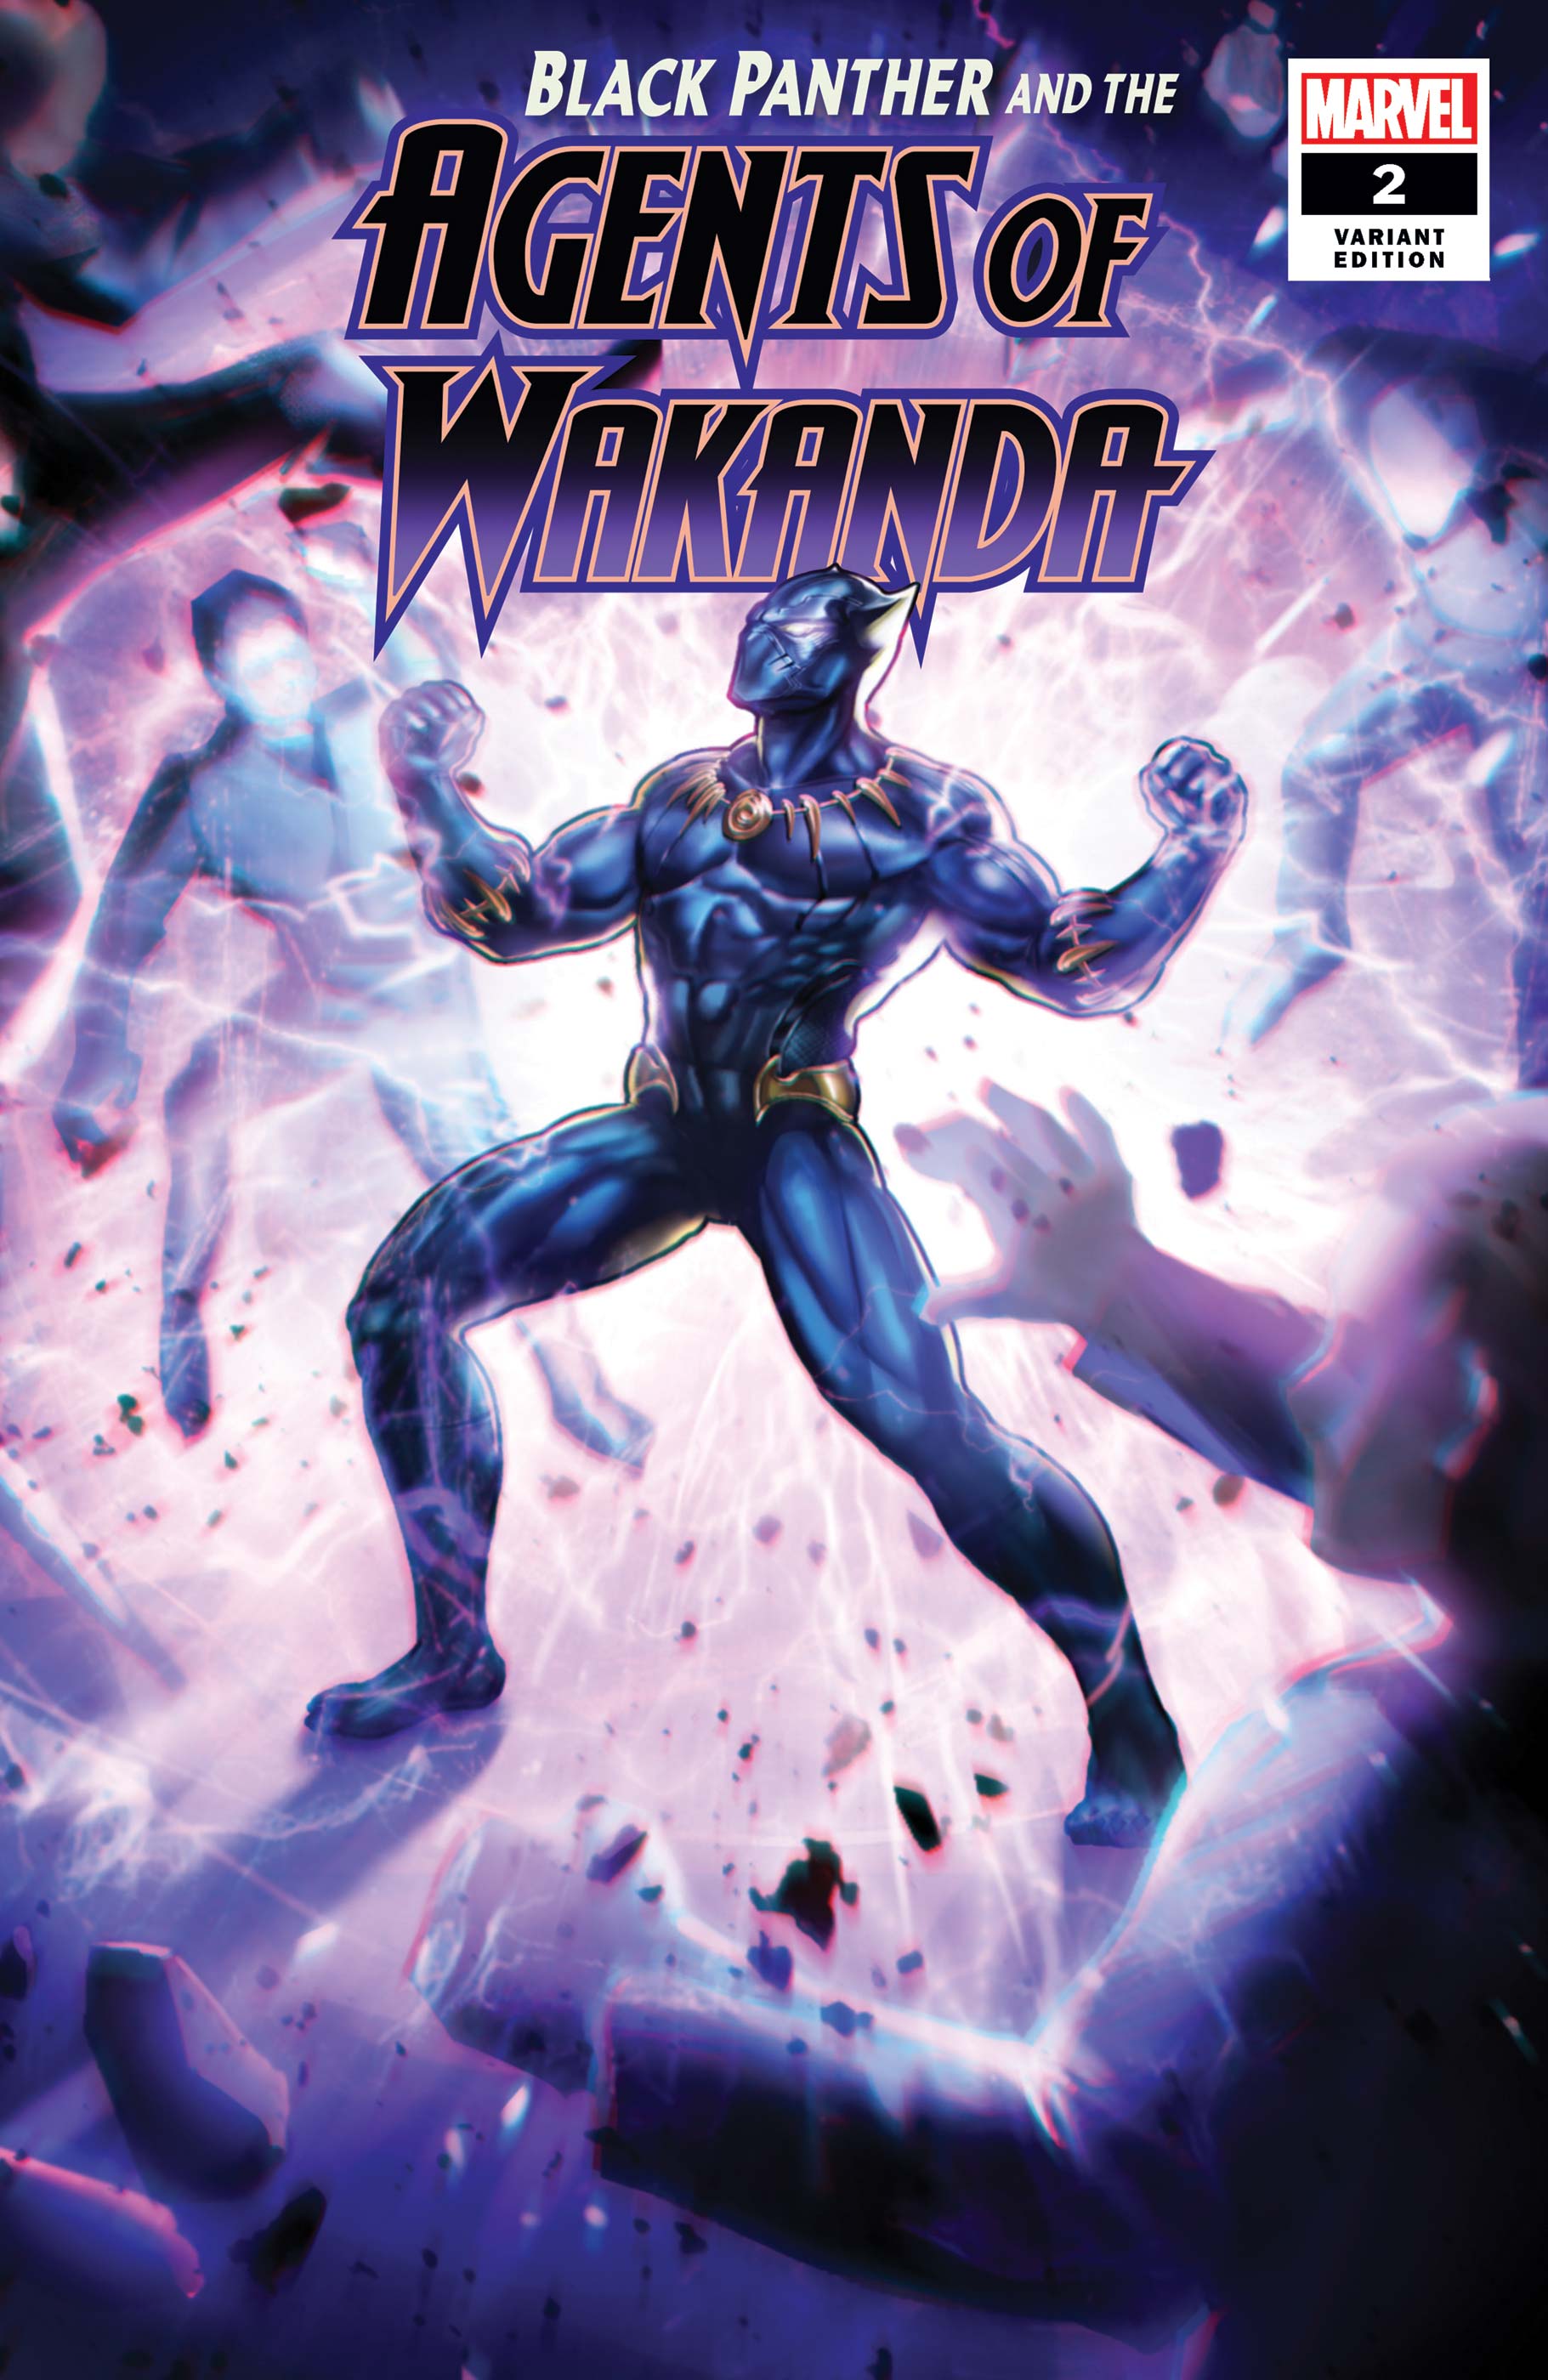 Black Panther and the Agents of Wakanda (2019) #2 (Variant)